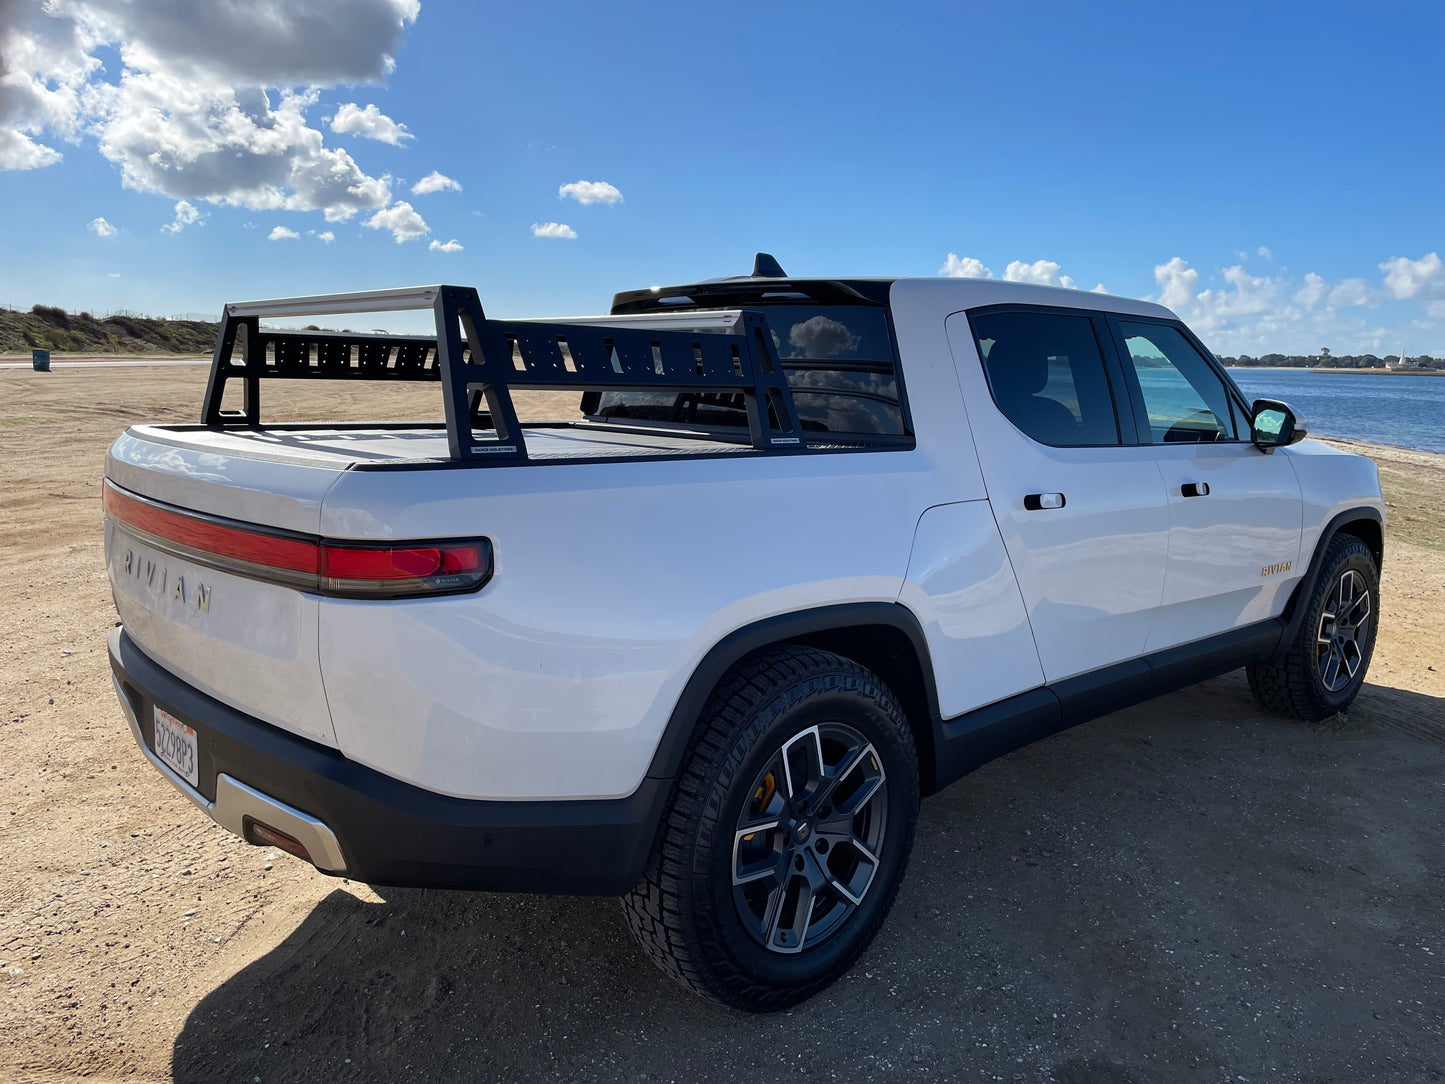 Sierra Rack System Compatible With Rivian R1T